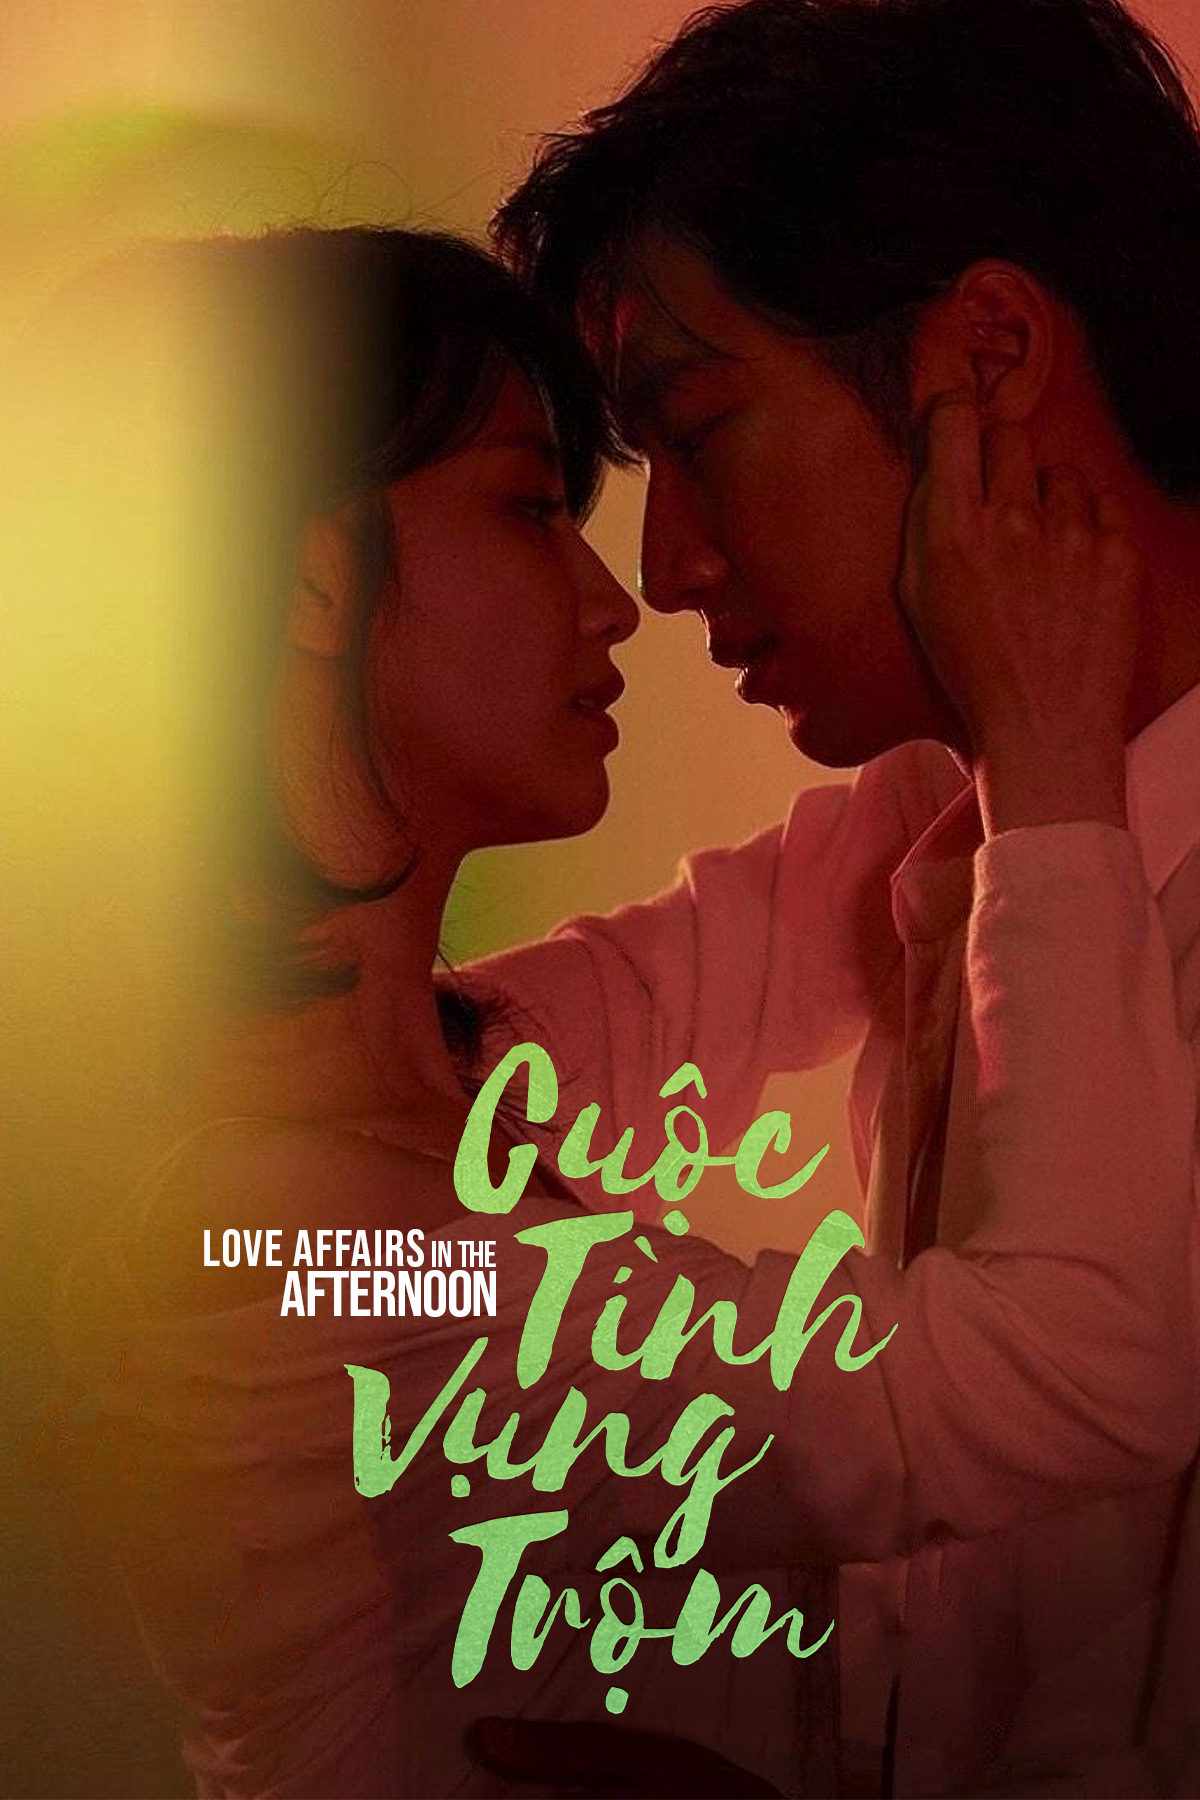 Poster Phim Cuộc Tình Vụng Trộm (Love Affairs in the Afternoon)